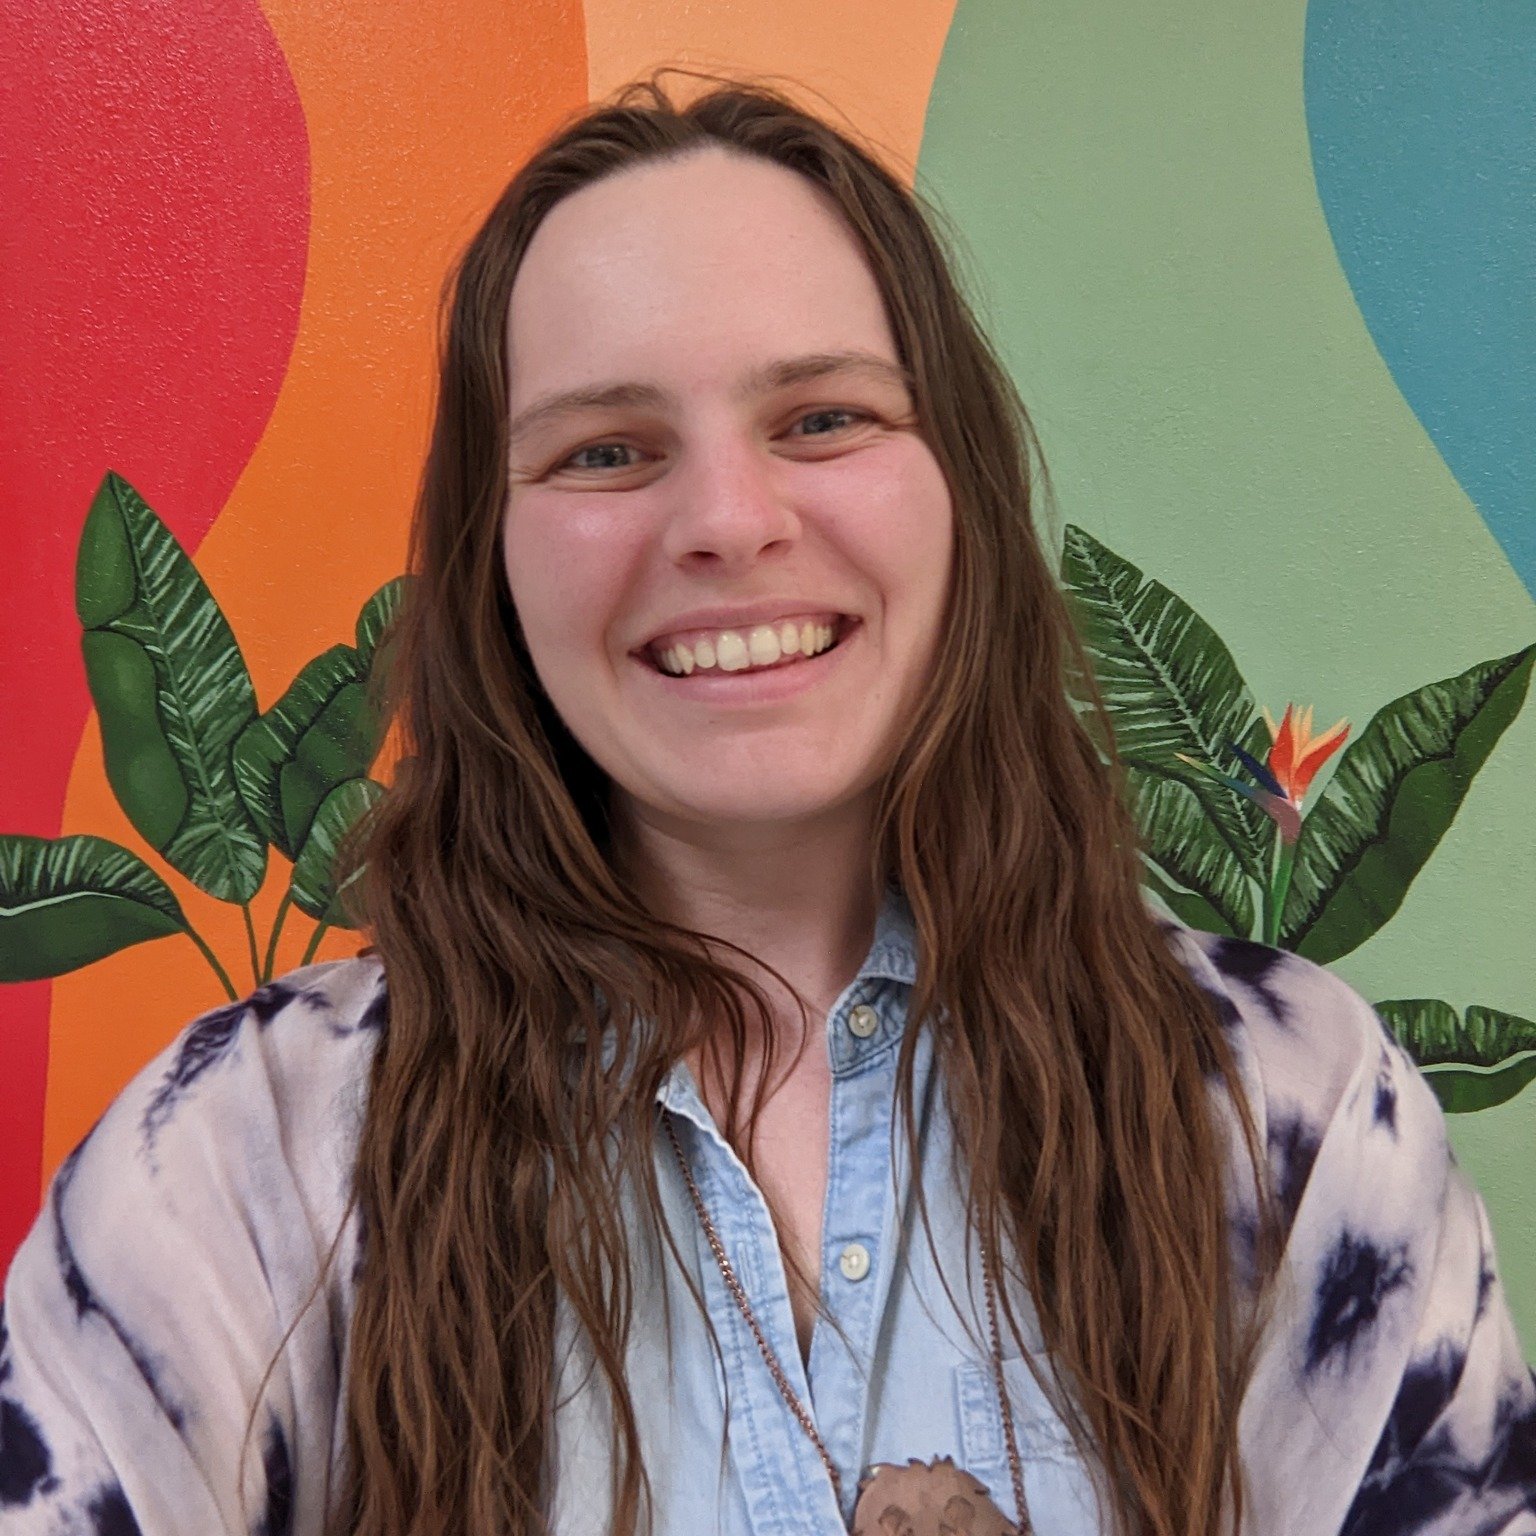 The Hutchinson Art Center is excited to introduce you all to this year's Kids Summer Art Camp instructor, Hannah Beam!

Hannah Beam is a local Hutchinson artist who specializes in live painting and collaboration. Her background in art education, grap